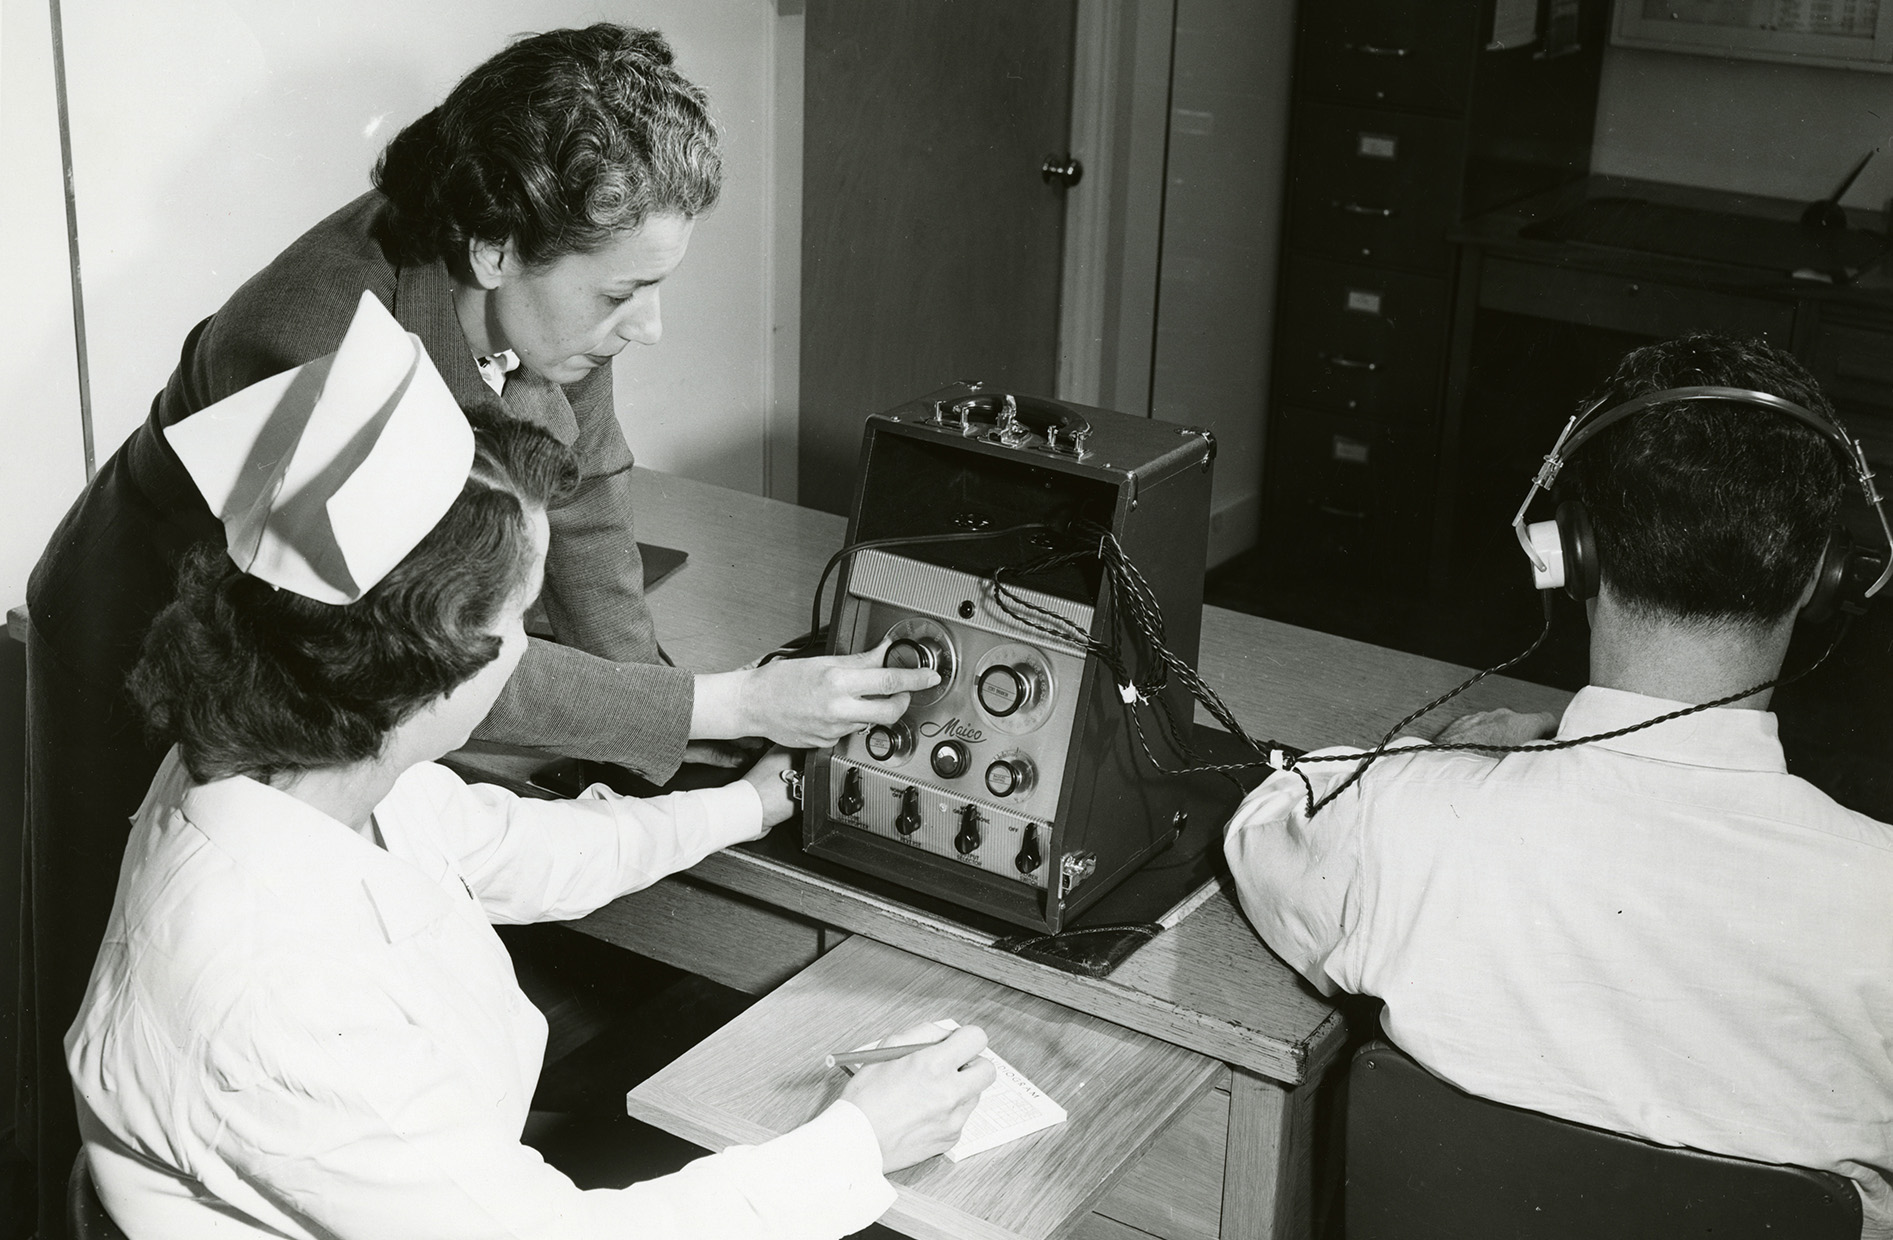 An Employers Mutual Occupational Health Consultant administering a hearing test c. 1960. Photograph courtesy of the Marathon County Historical Society.